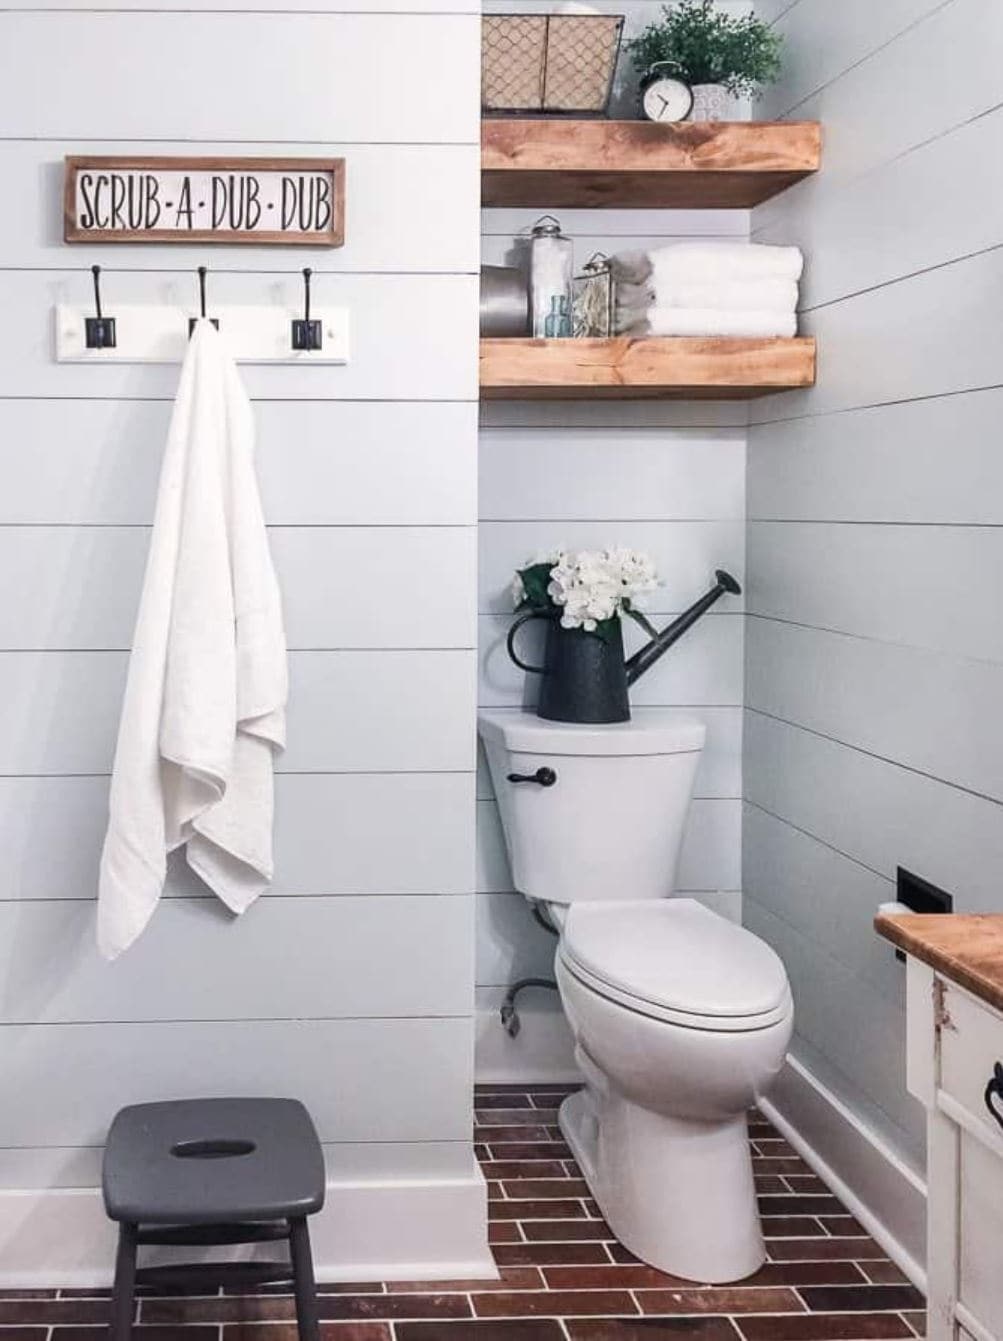 A bathroom remodel with shiplap walls, a wooden towel rack, and open shelving above the toilet area.